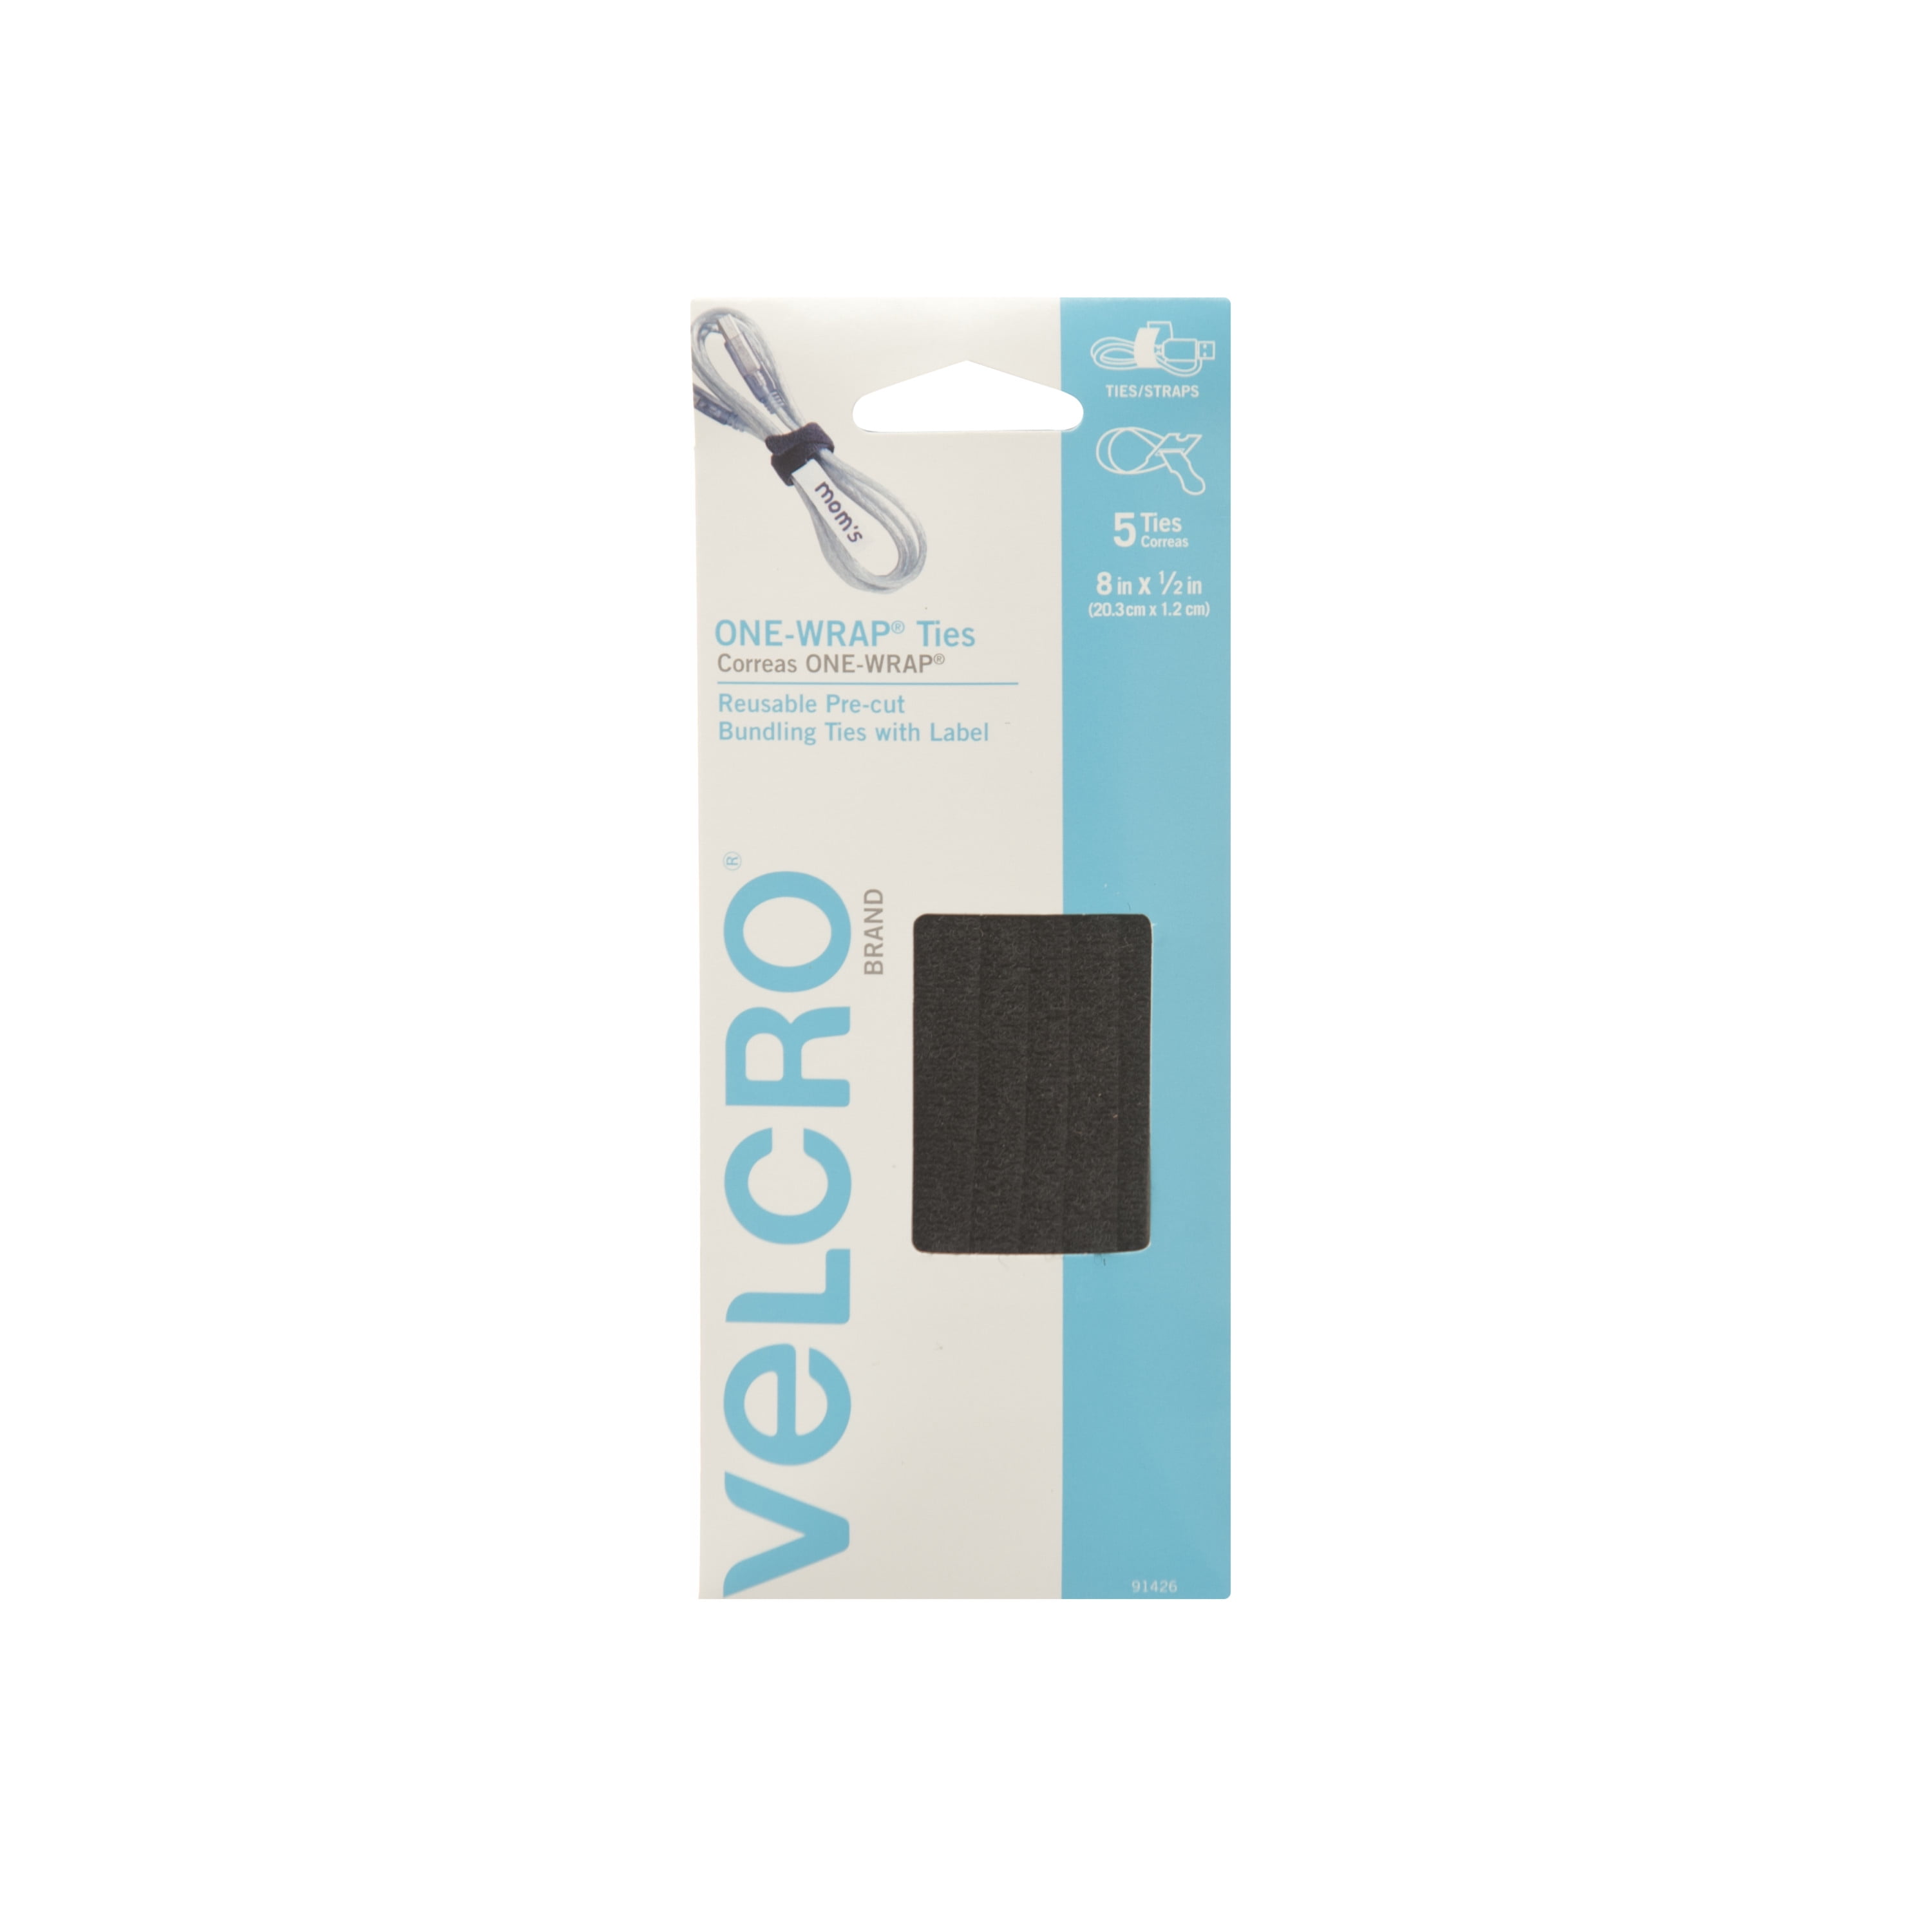 Velcro Brand Reusable Thin Ties 8in x 1/2in 25 Black 25 Gray For Wires & Cords 